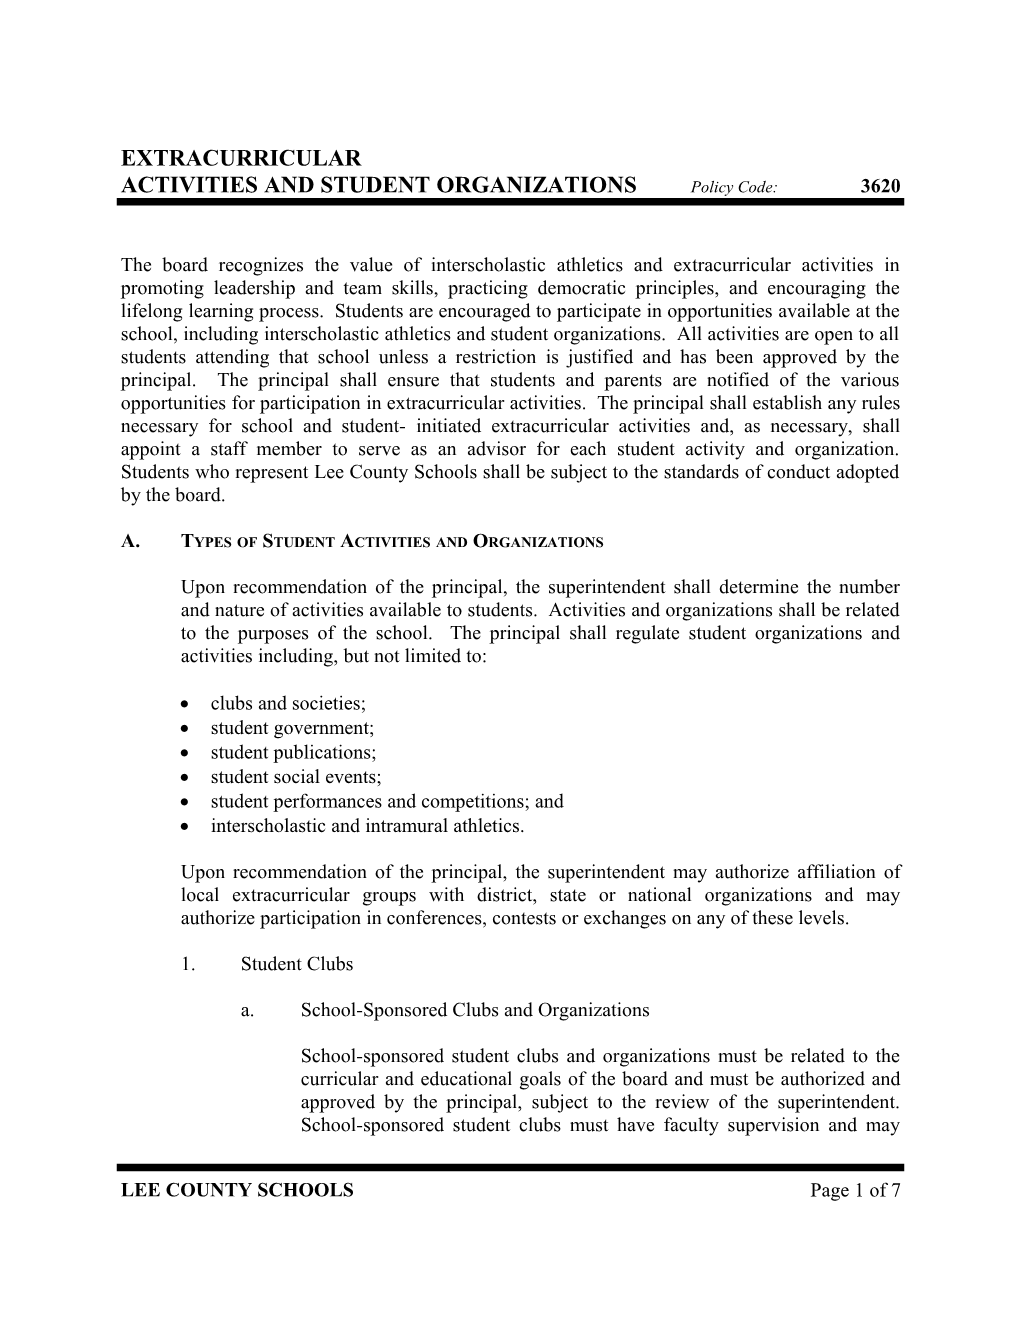 ACTIVITIES and STUDENT ORGANIZATIONS Policy Code:3620